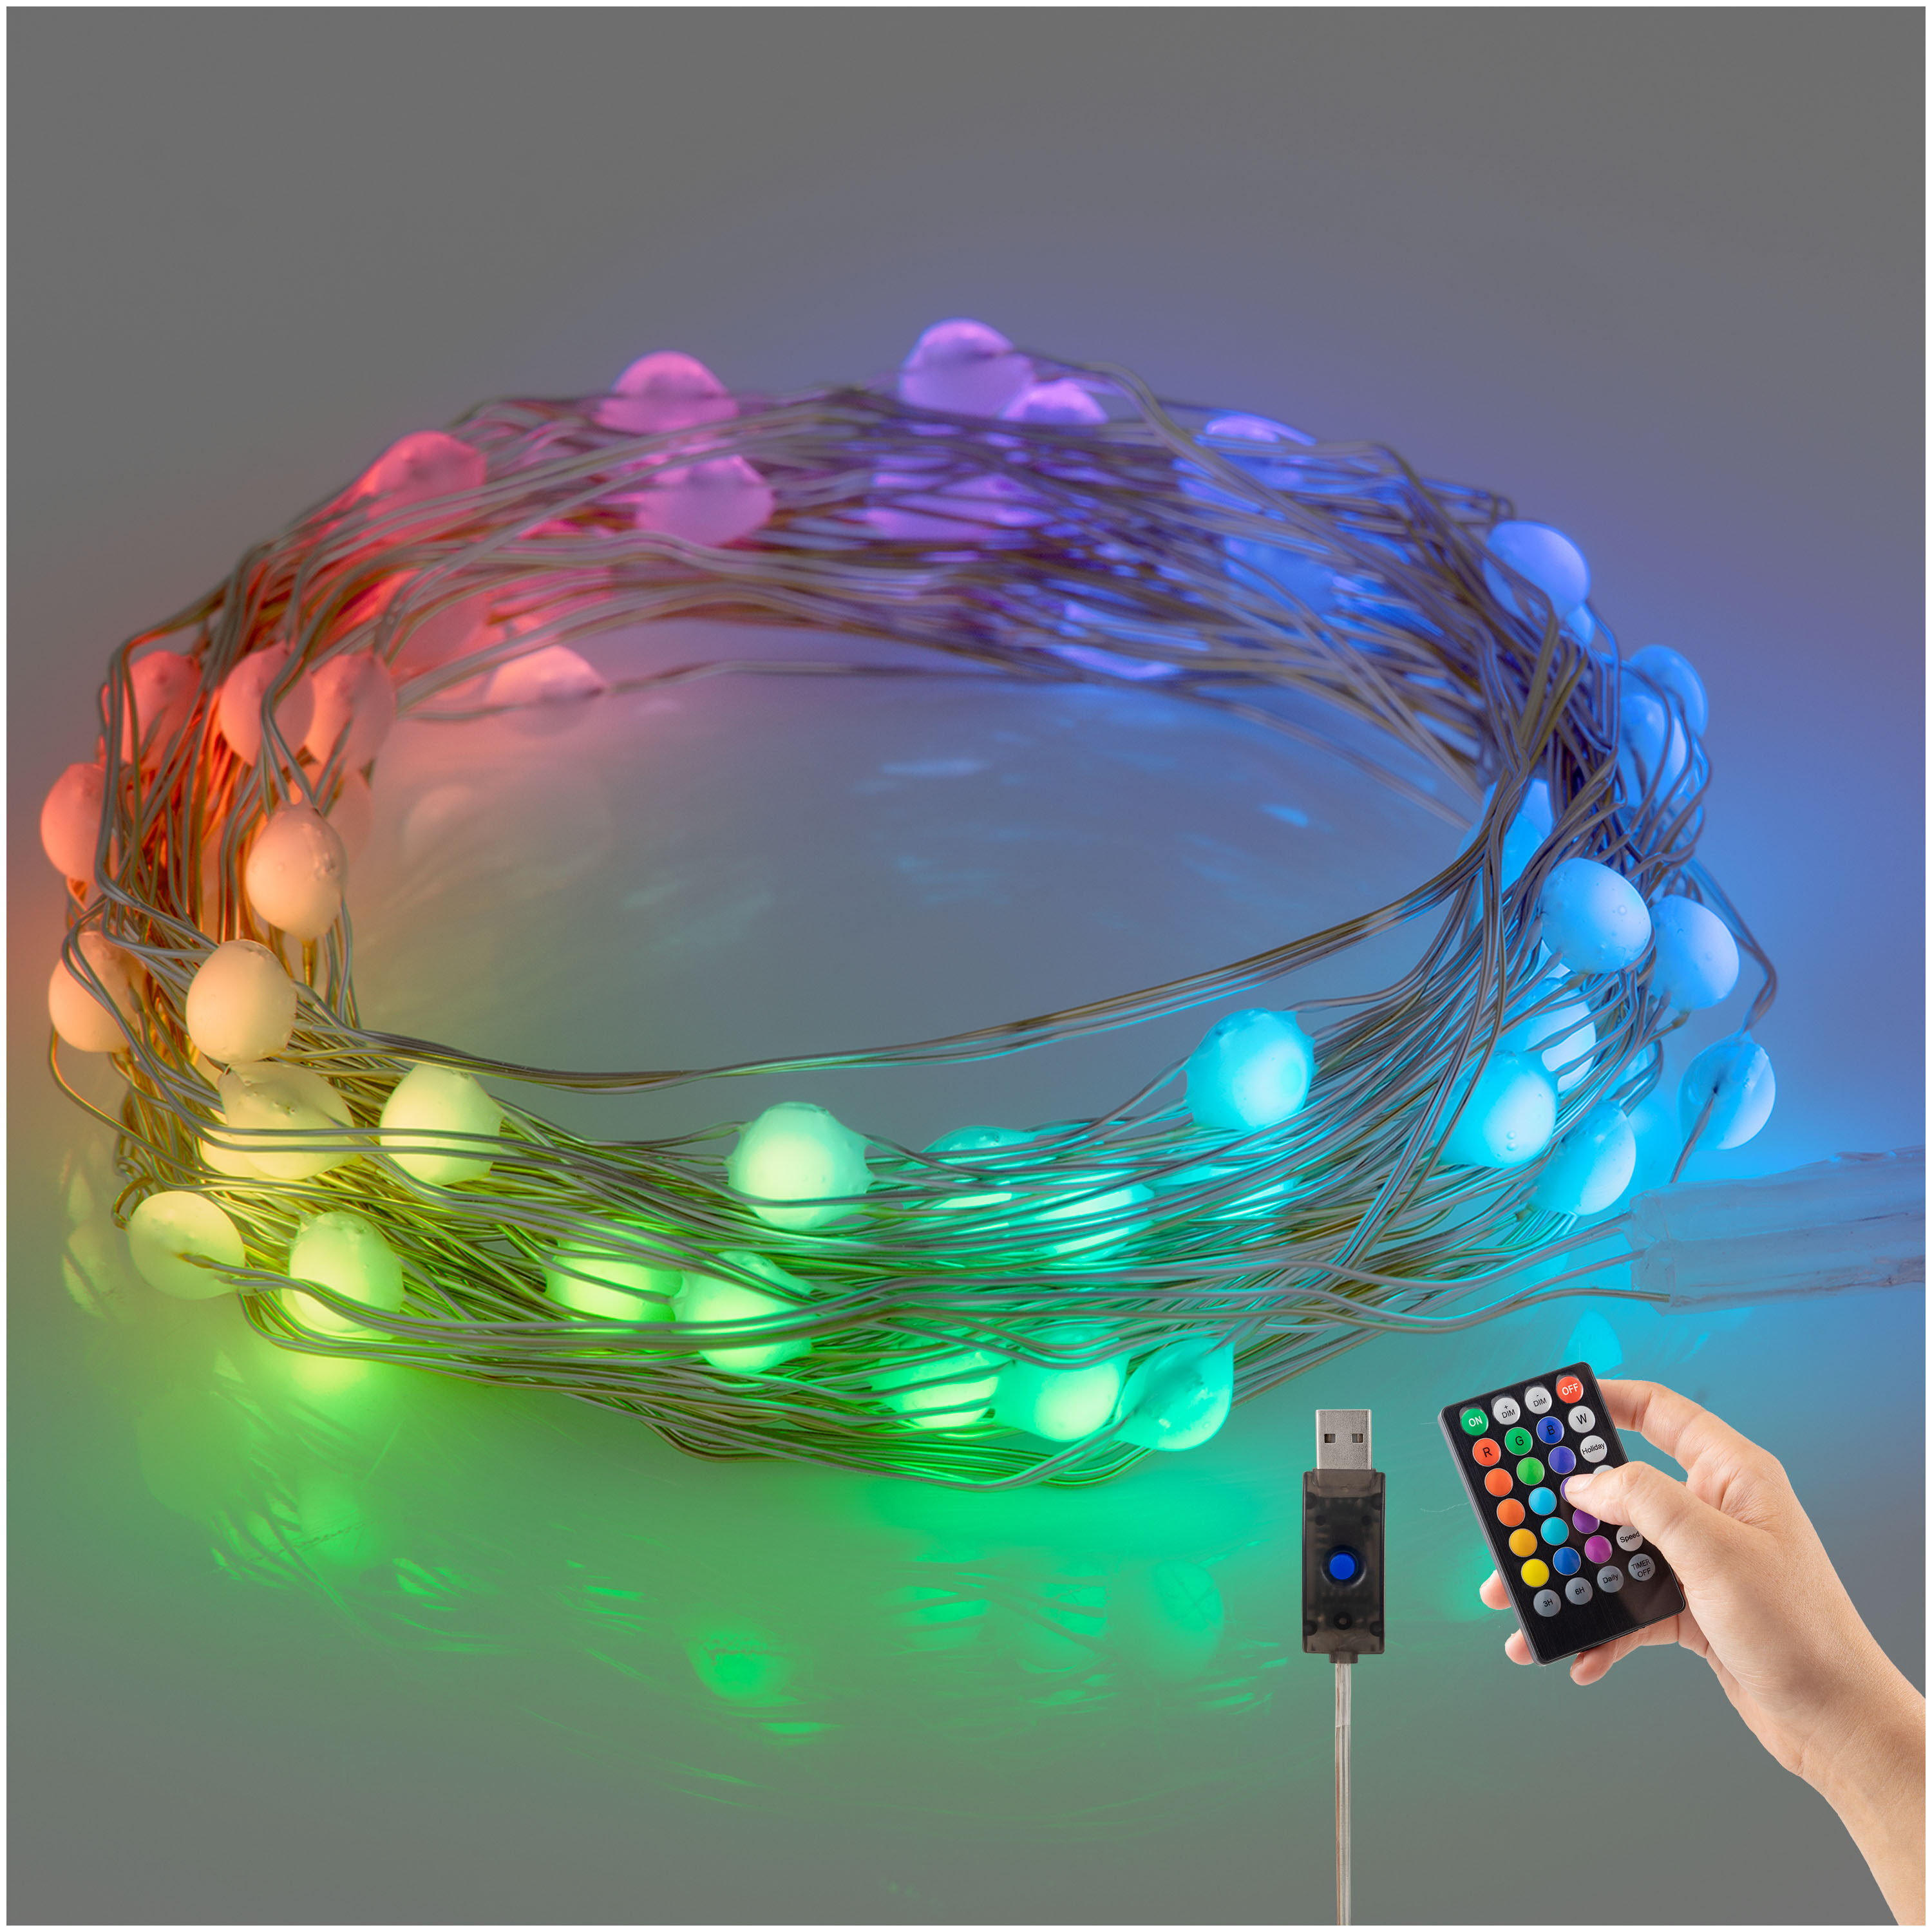 Window Curtain Lights, 600 Led 20 Feet Dimmable with Remote to Set 8  Lighting Modes and Timer, Fairy Led Lights for Bedroom Wall Wedding  Decorate